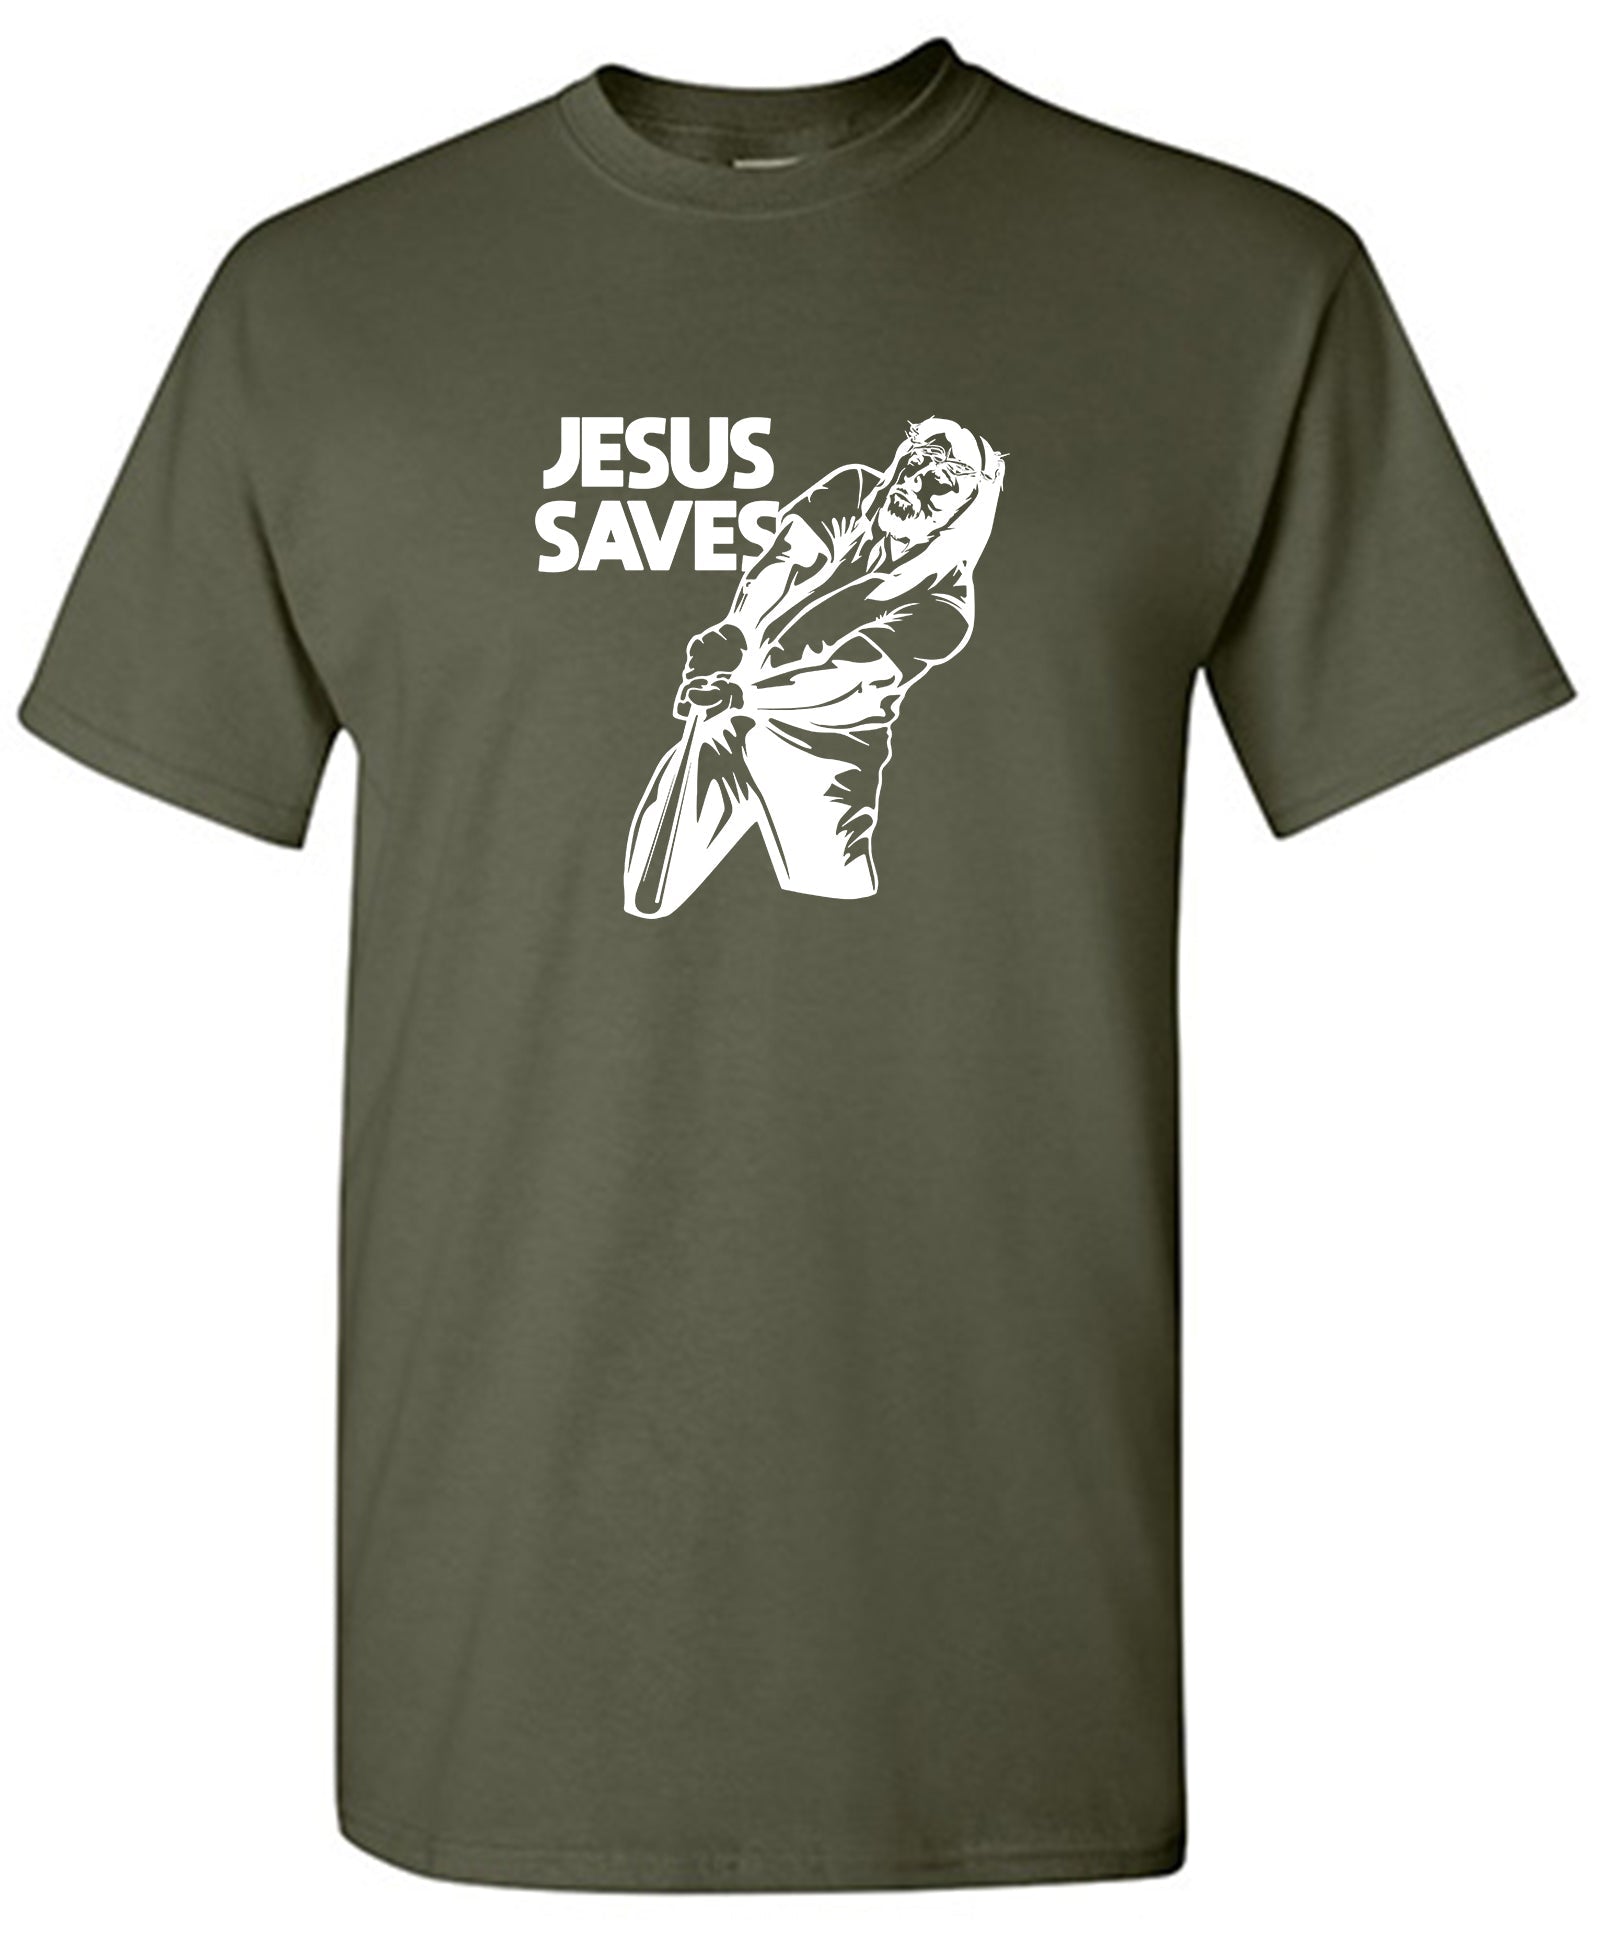 Jesus Saves, Graphic Shirt - Funny T Shirts & Graphic Tees